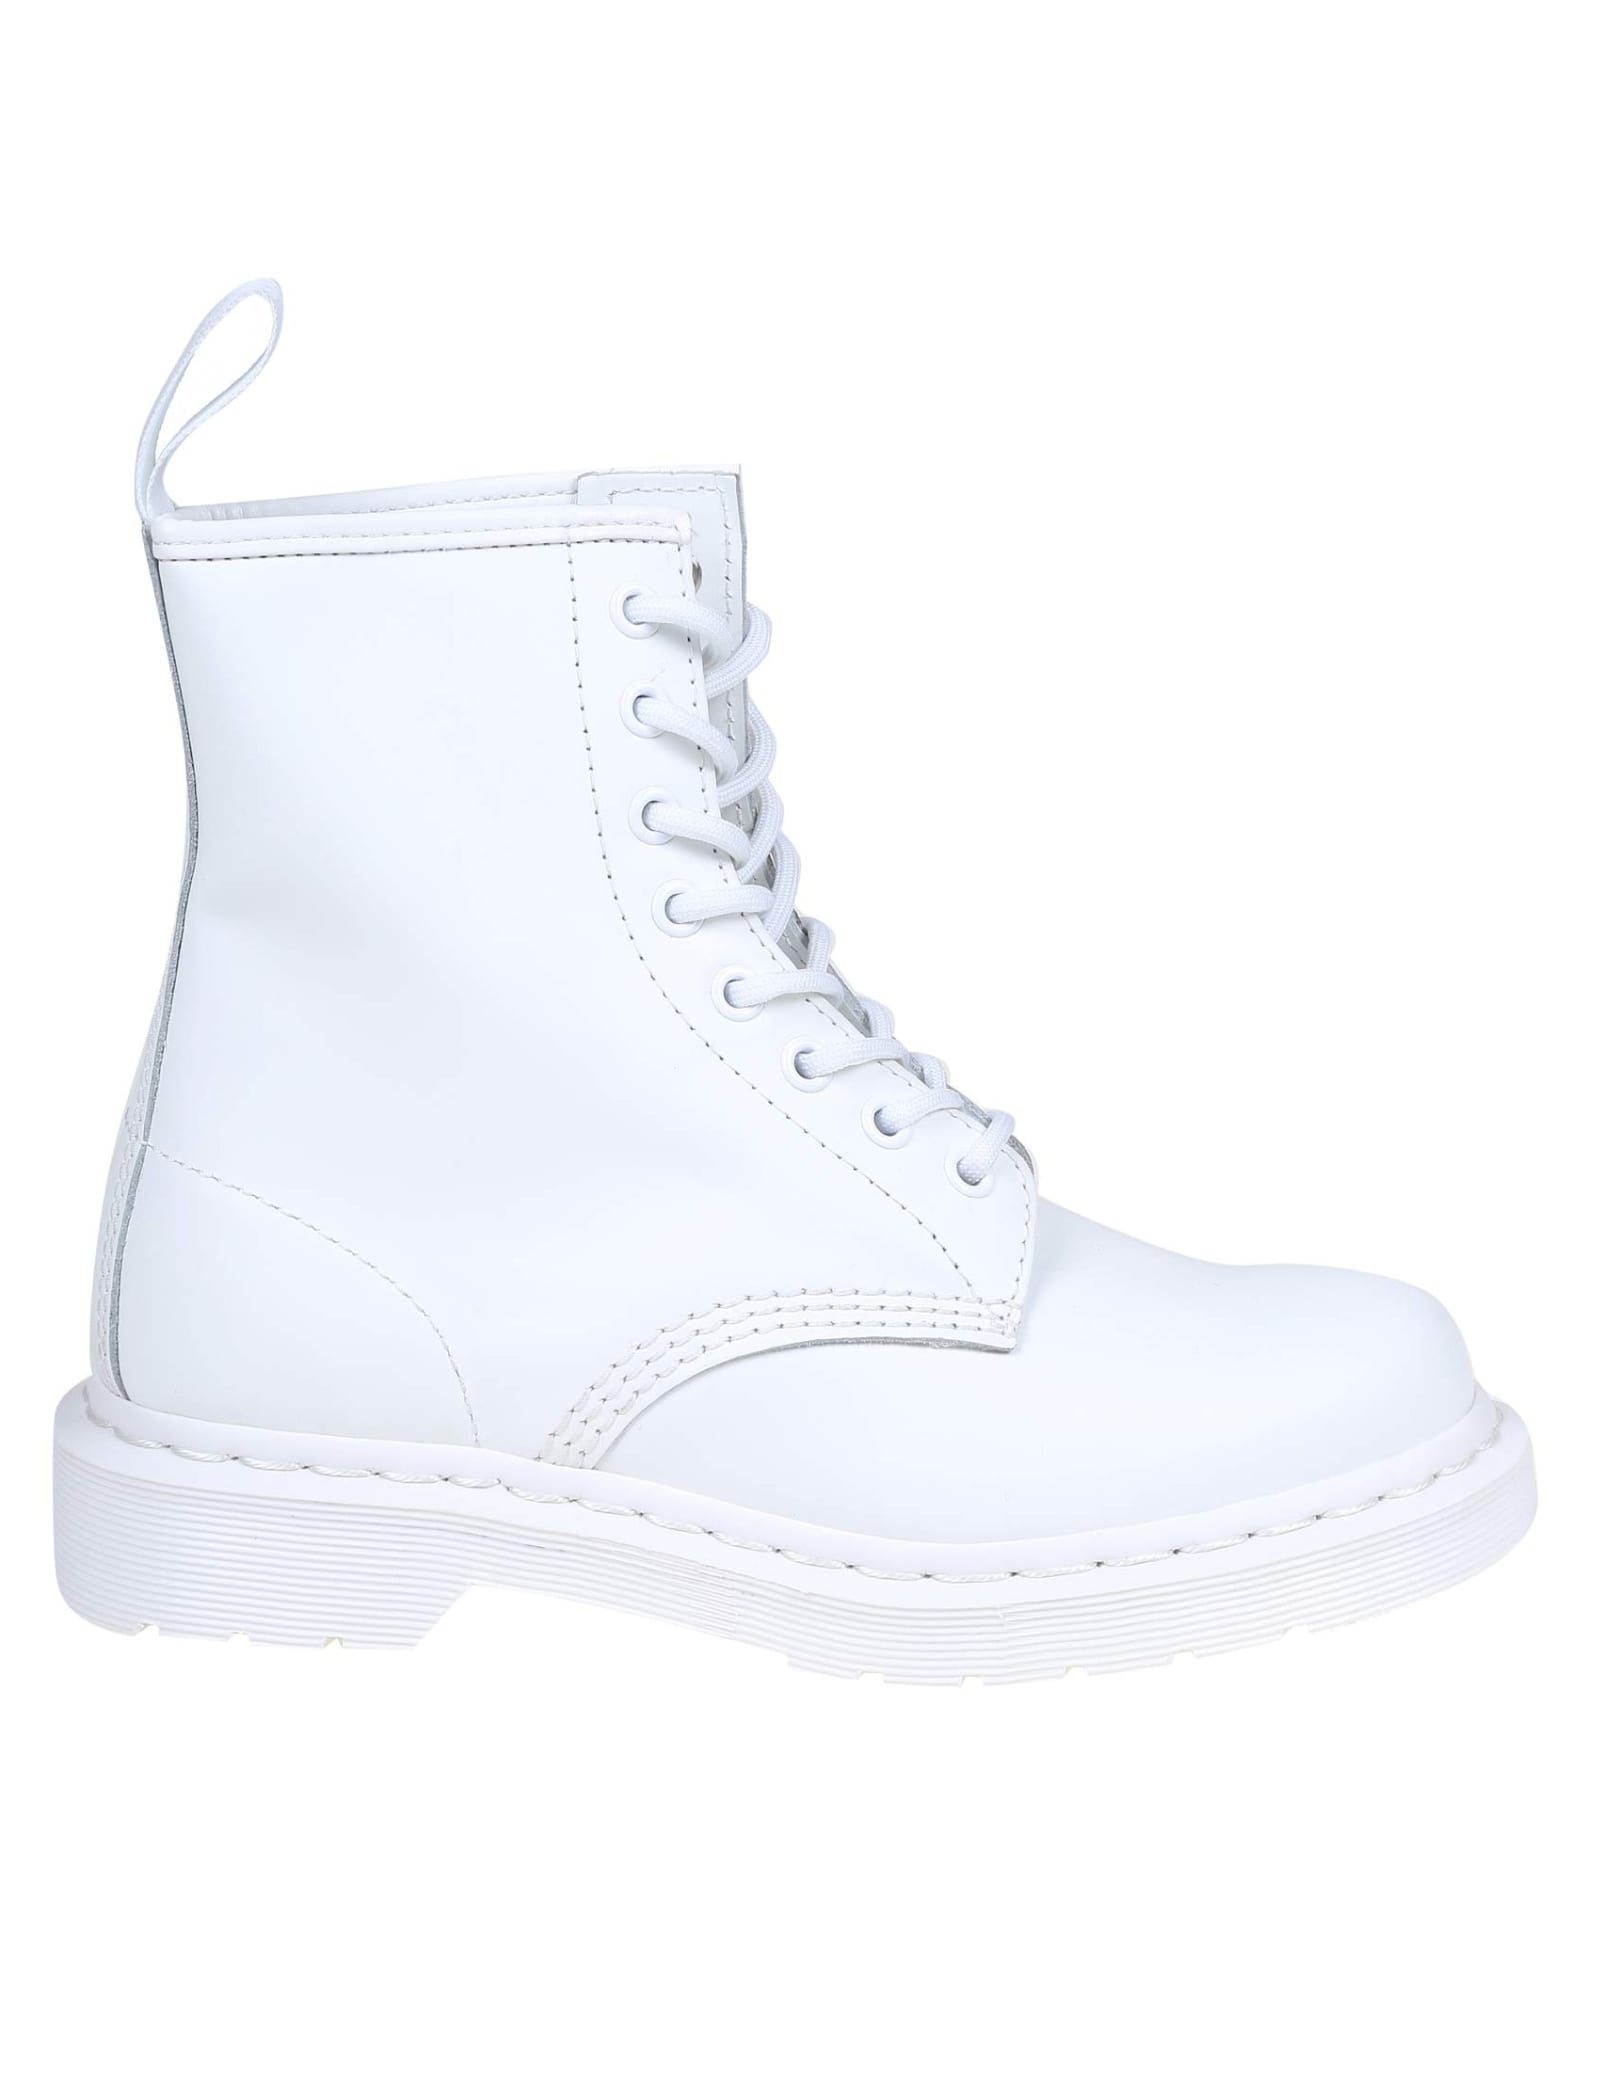 Dr. Martens Dr. martens Mono Smooth Boots In White Leather